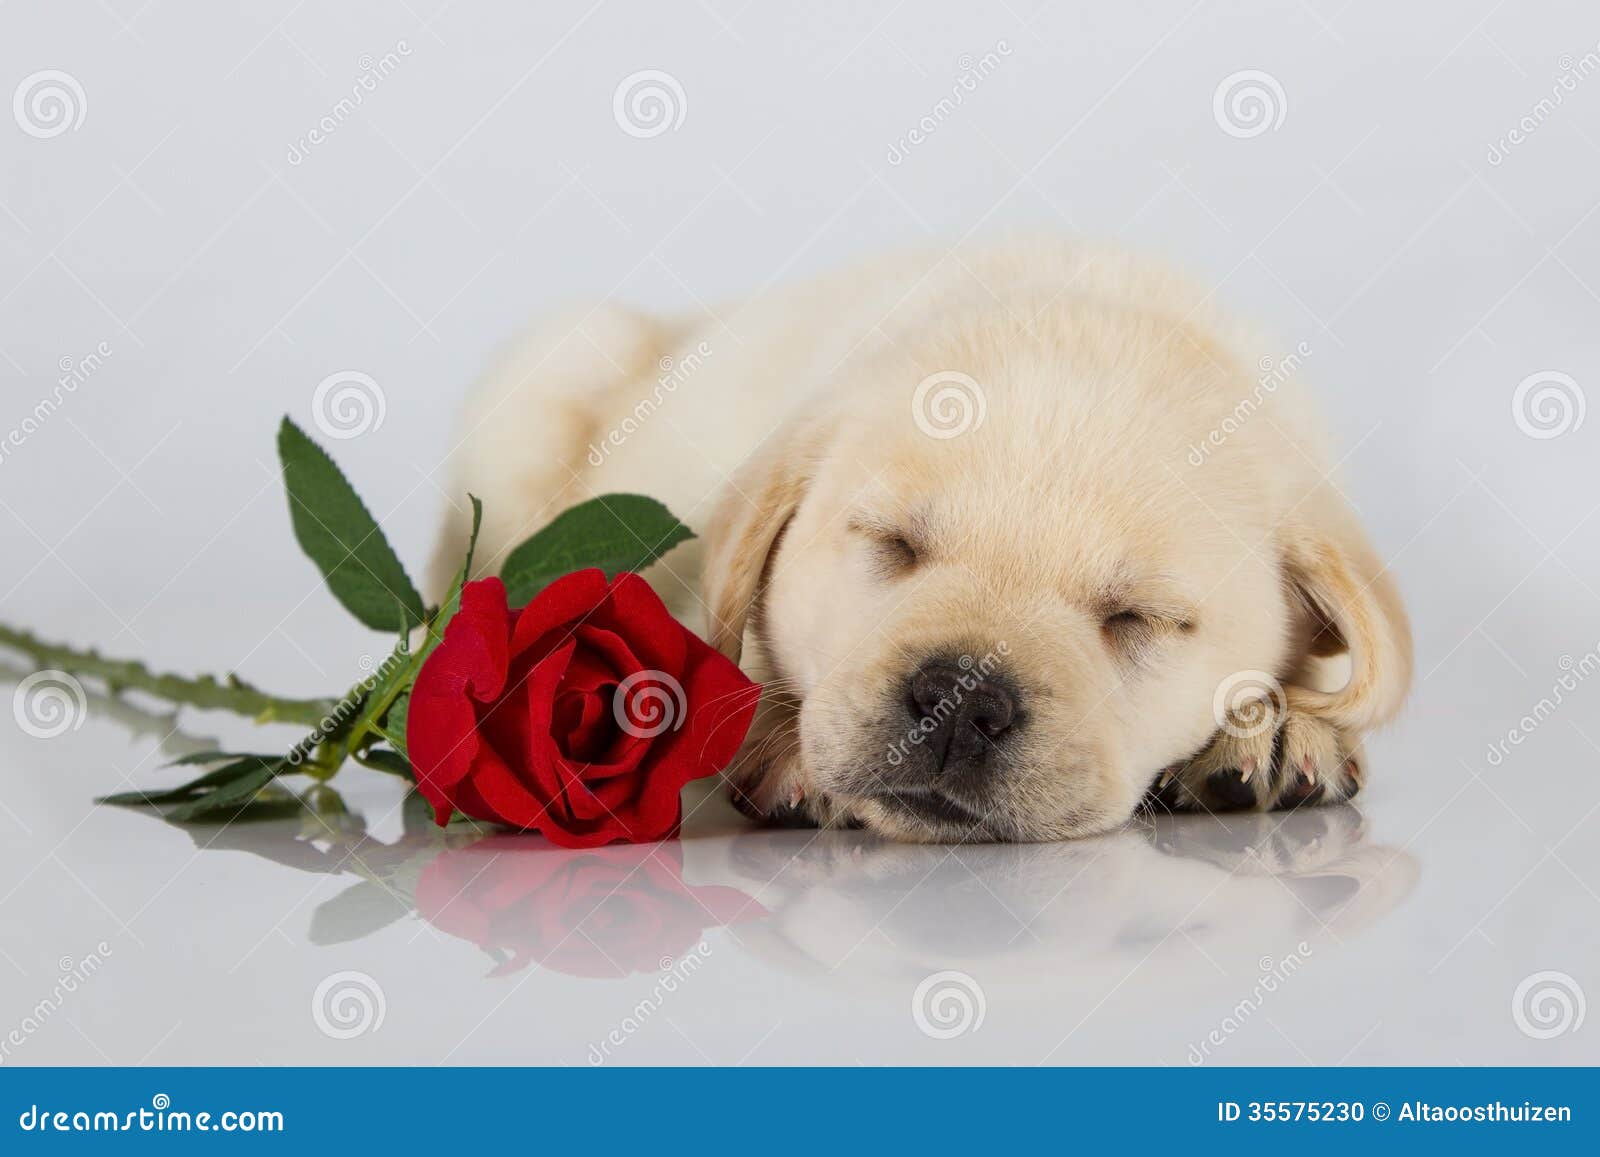 Labrador Puppy Sleeping On White With Red Rose Stock Photo - Image ...